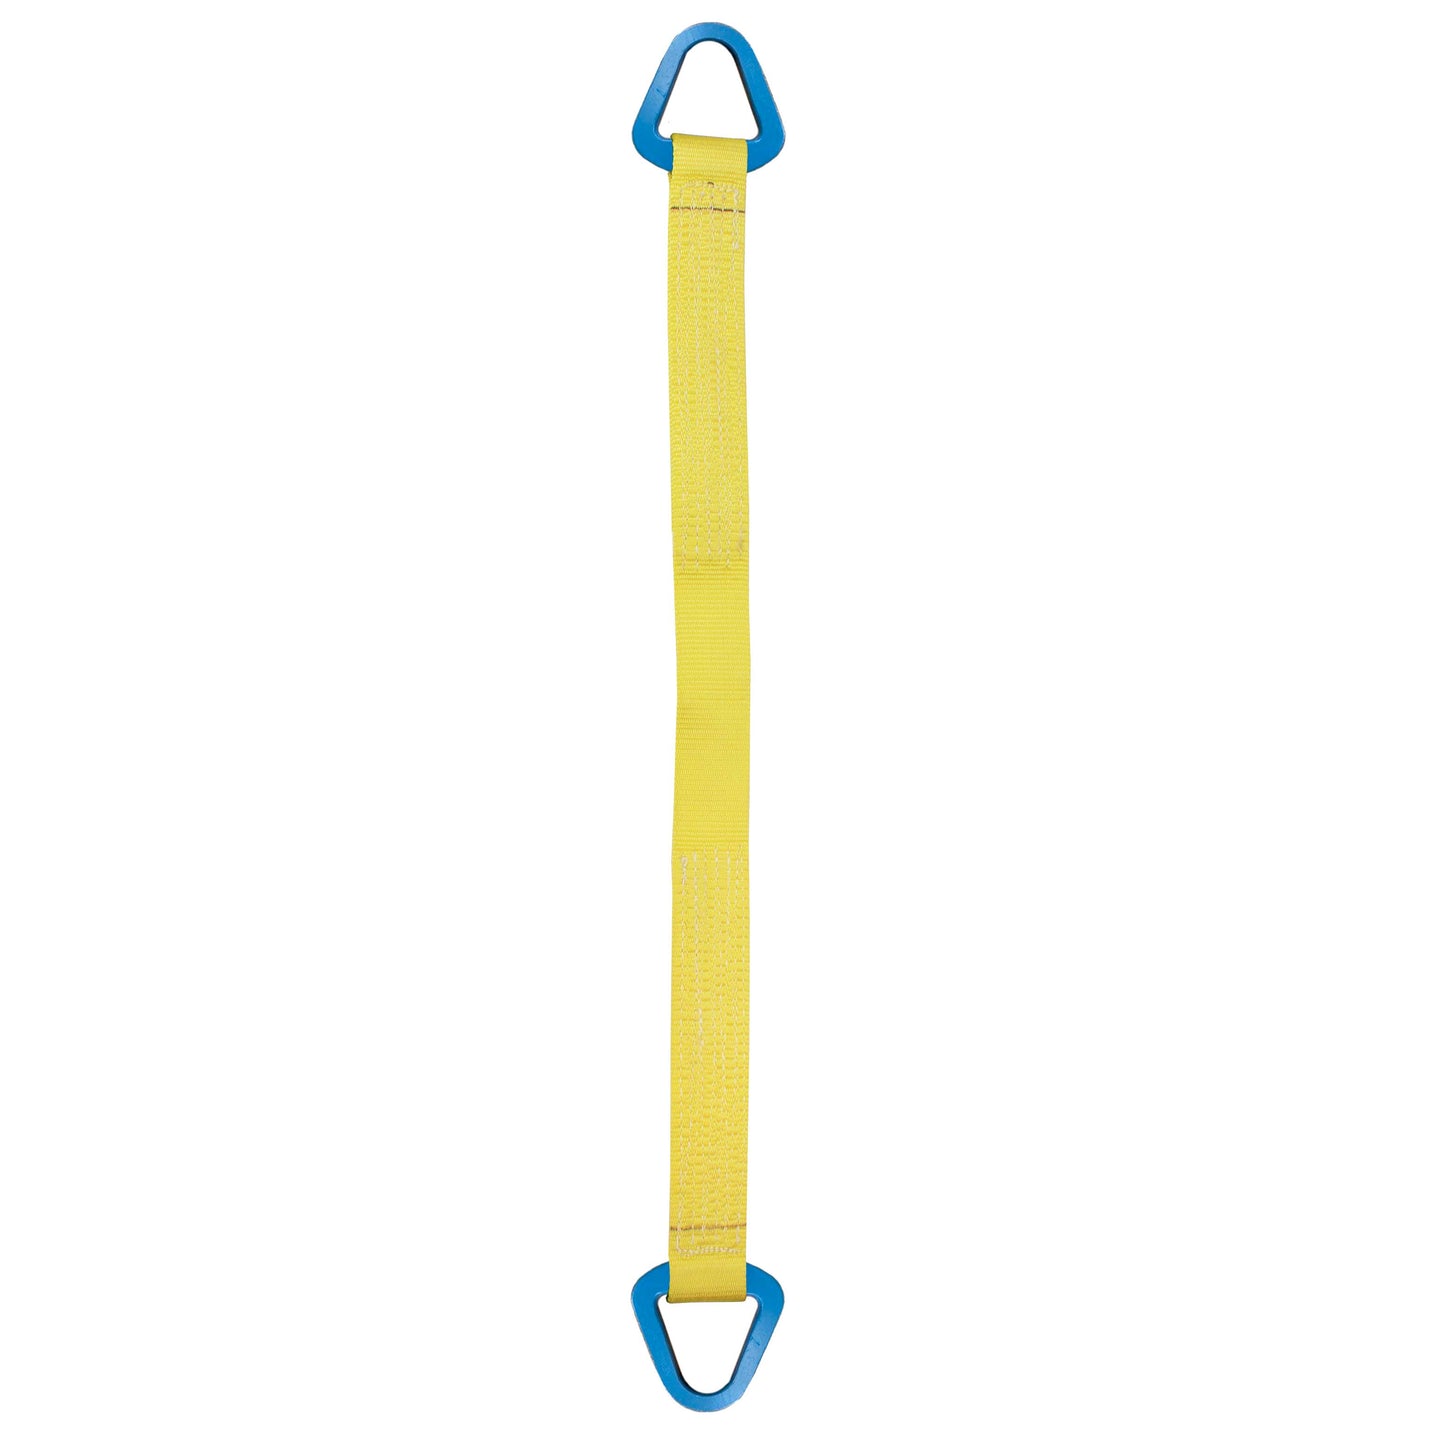 Nylon Lifting Sling Triangle 4 inch x 12 foot 2ply image 1 of 2